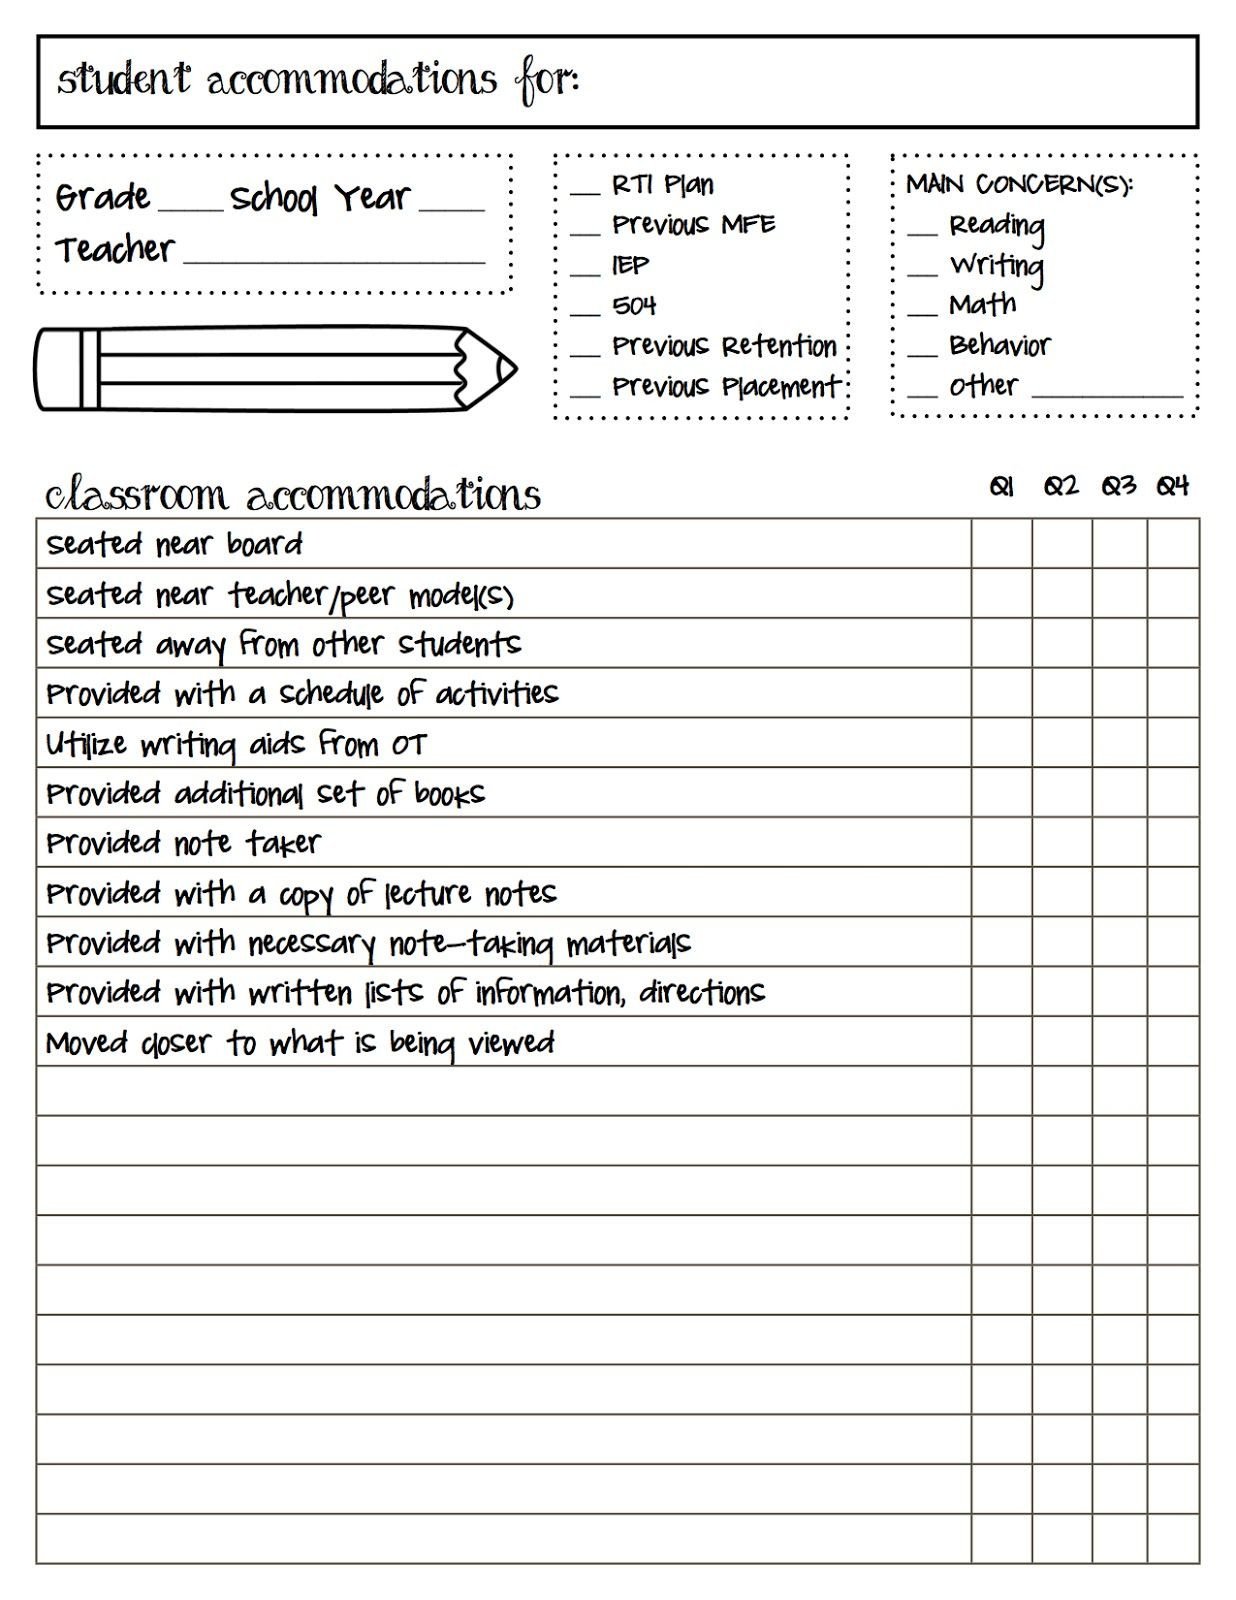 Behavior Checklist for Students Free Checklist Track Student Ac Modations with This